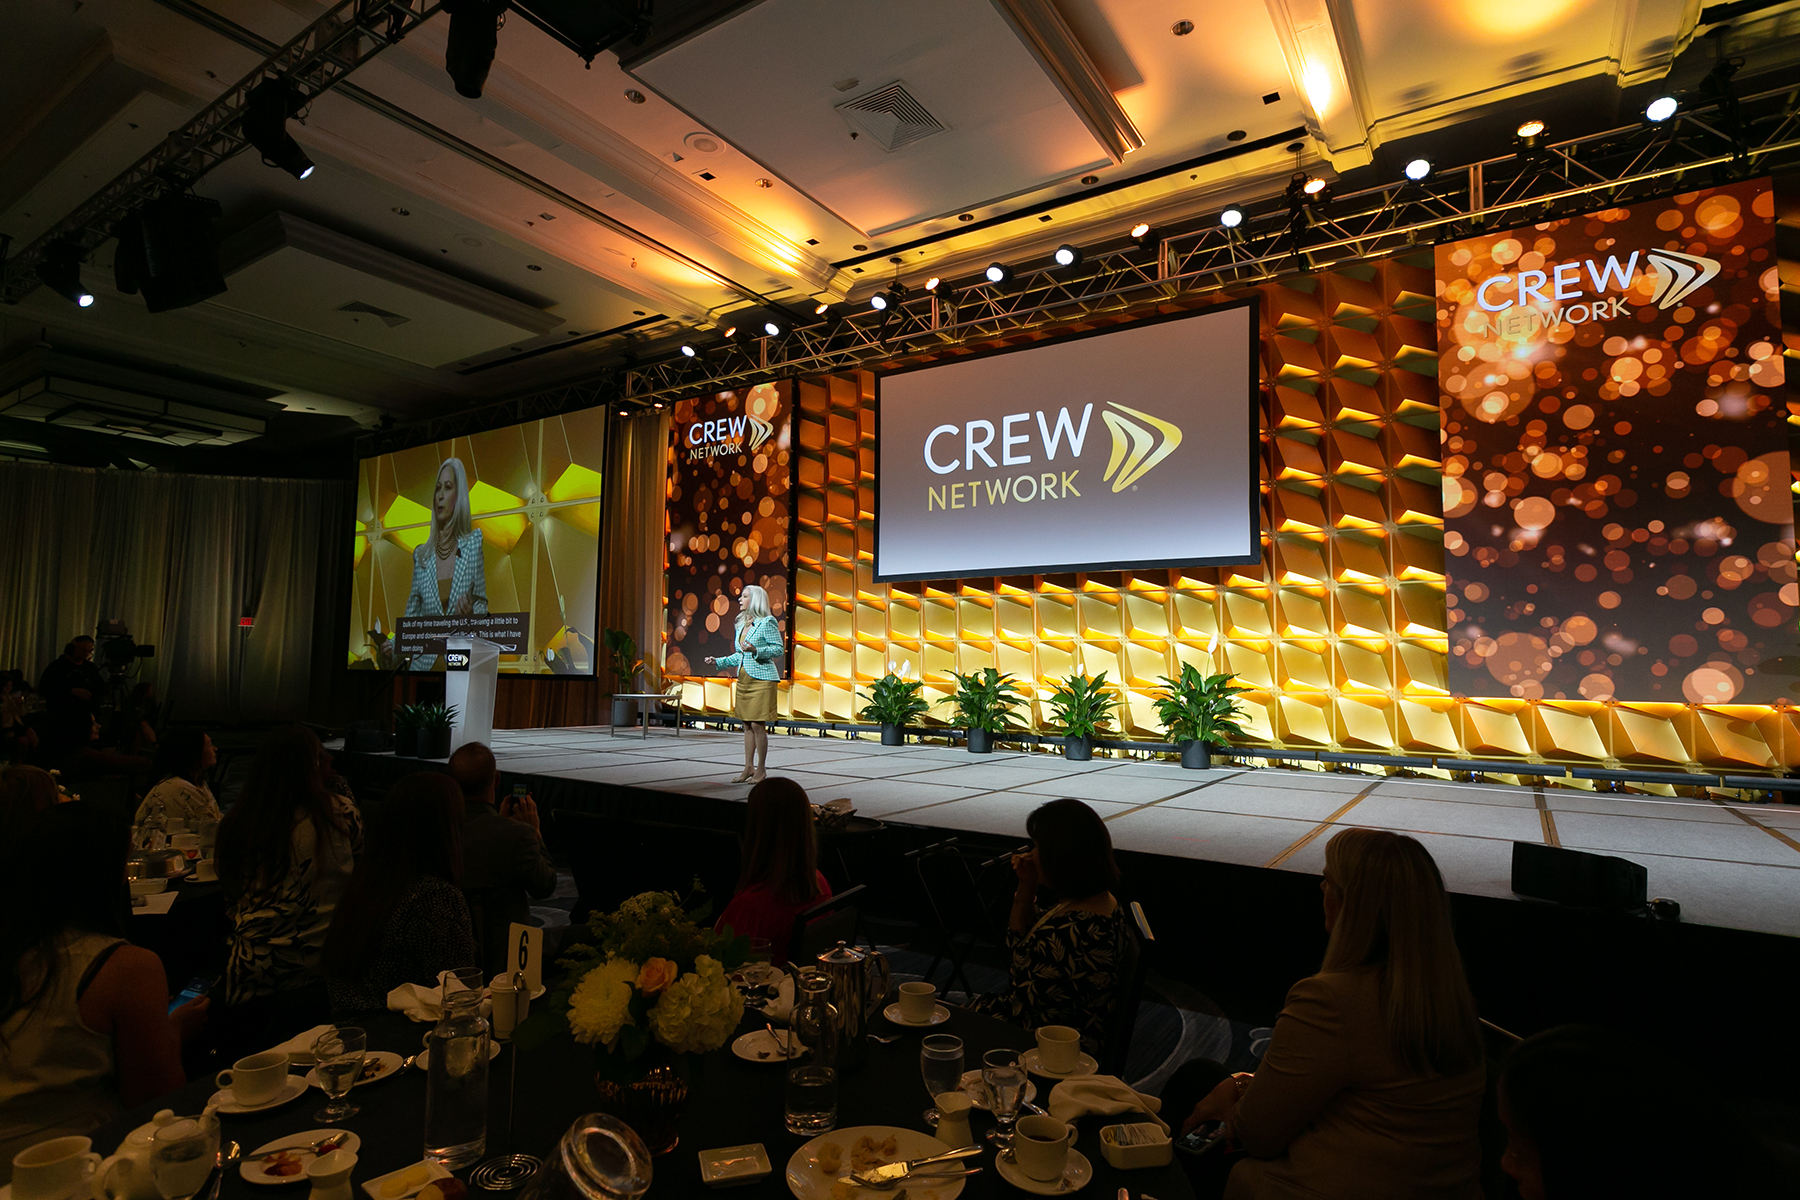 CREW Network event stage with speaker